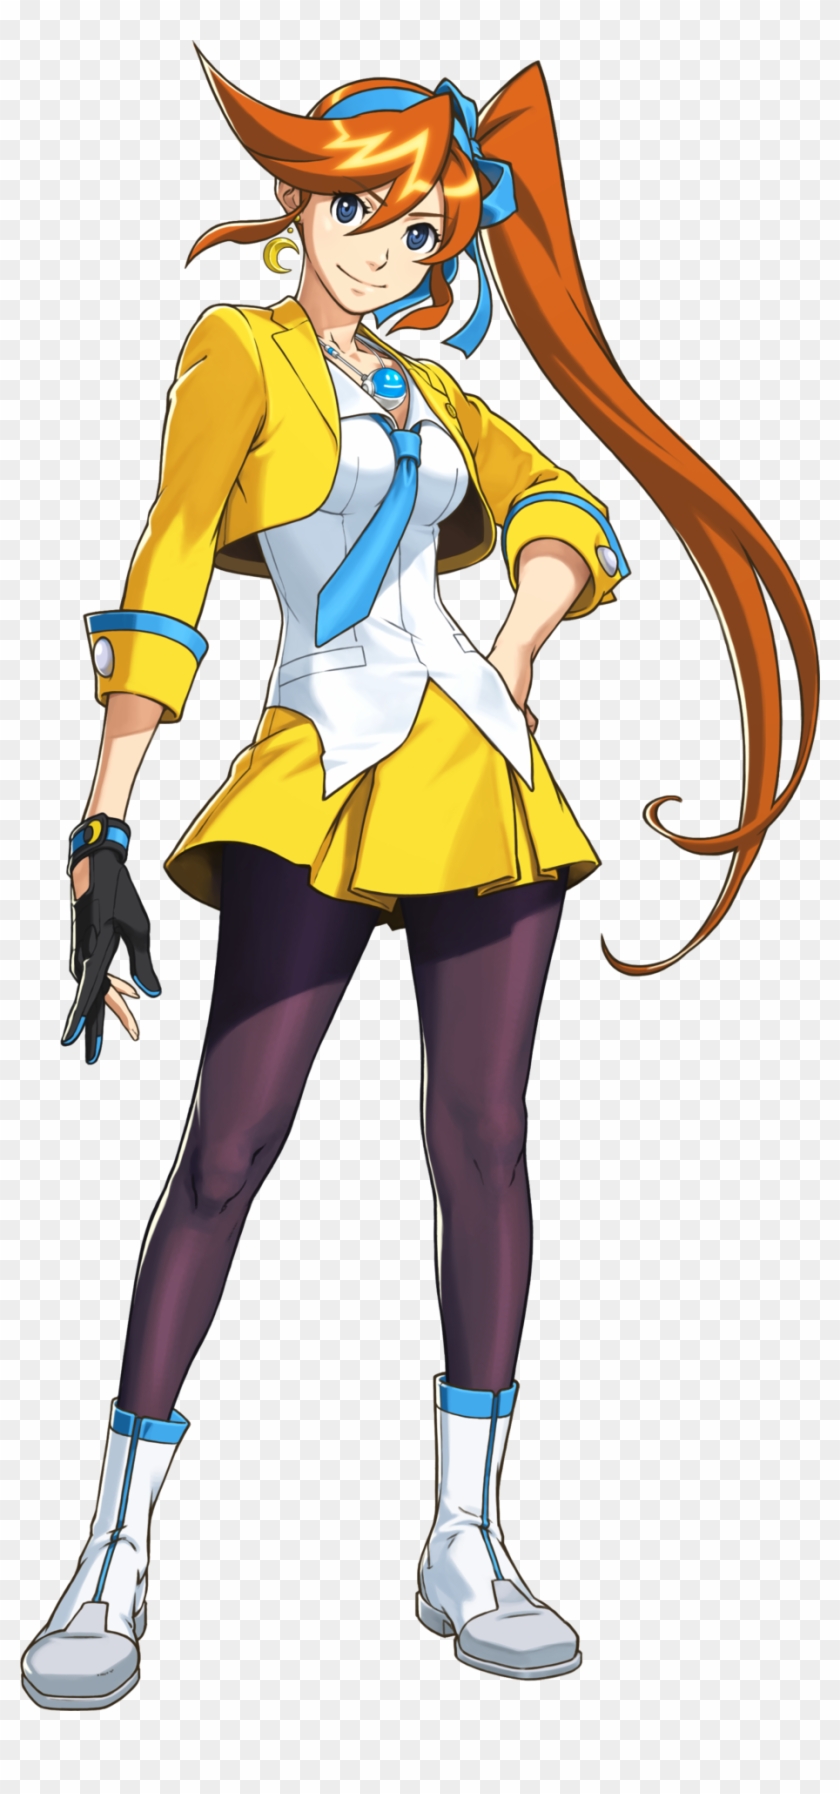 Athena Cykes Phoenix Wright Ace Attorney Female Character Athena Cykes Hd Png Download 919x1920 4995785 Pngfind - roblox athena